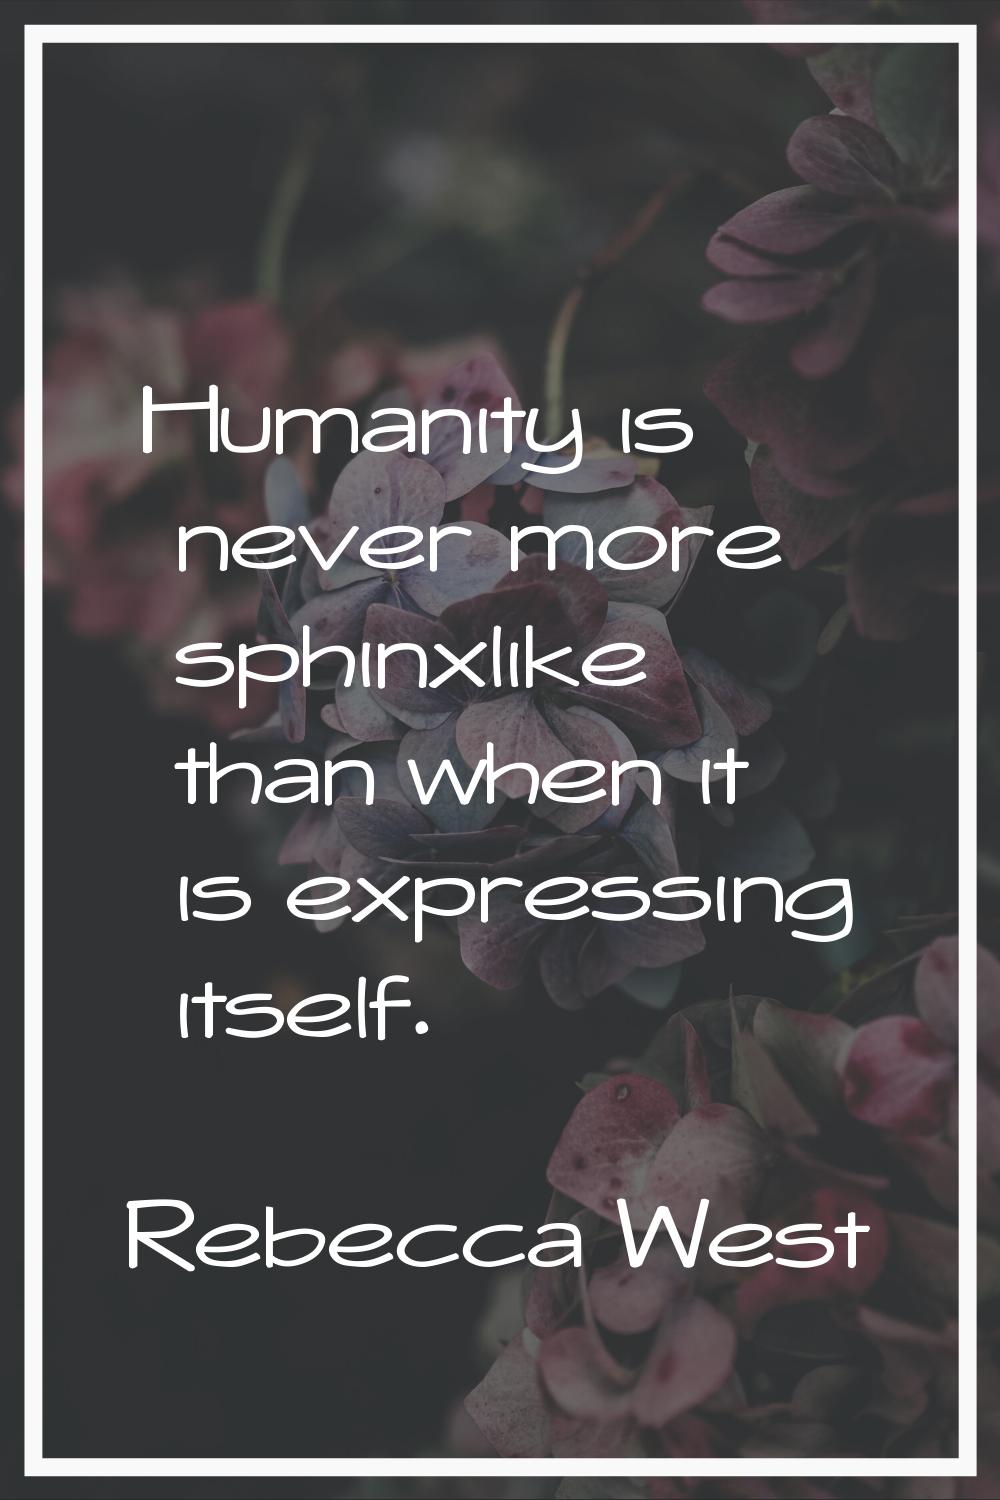 Humanity is never more sphinxlike than when it is expressing itself.